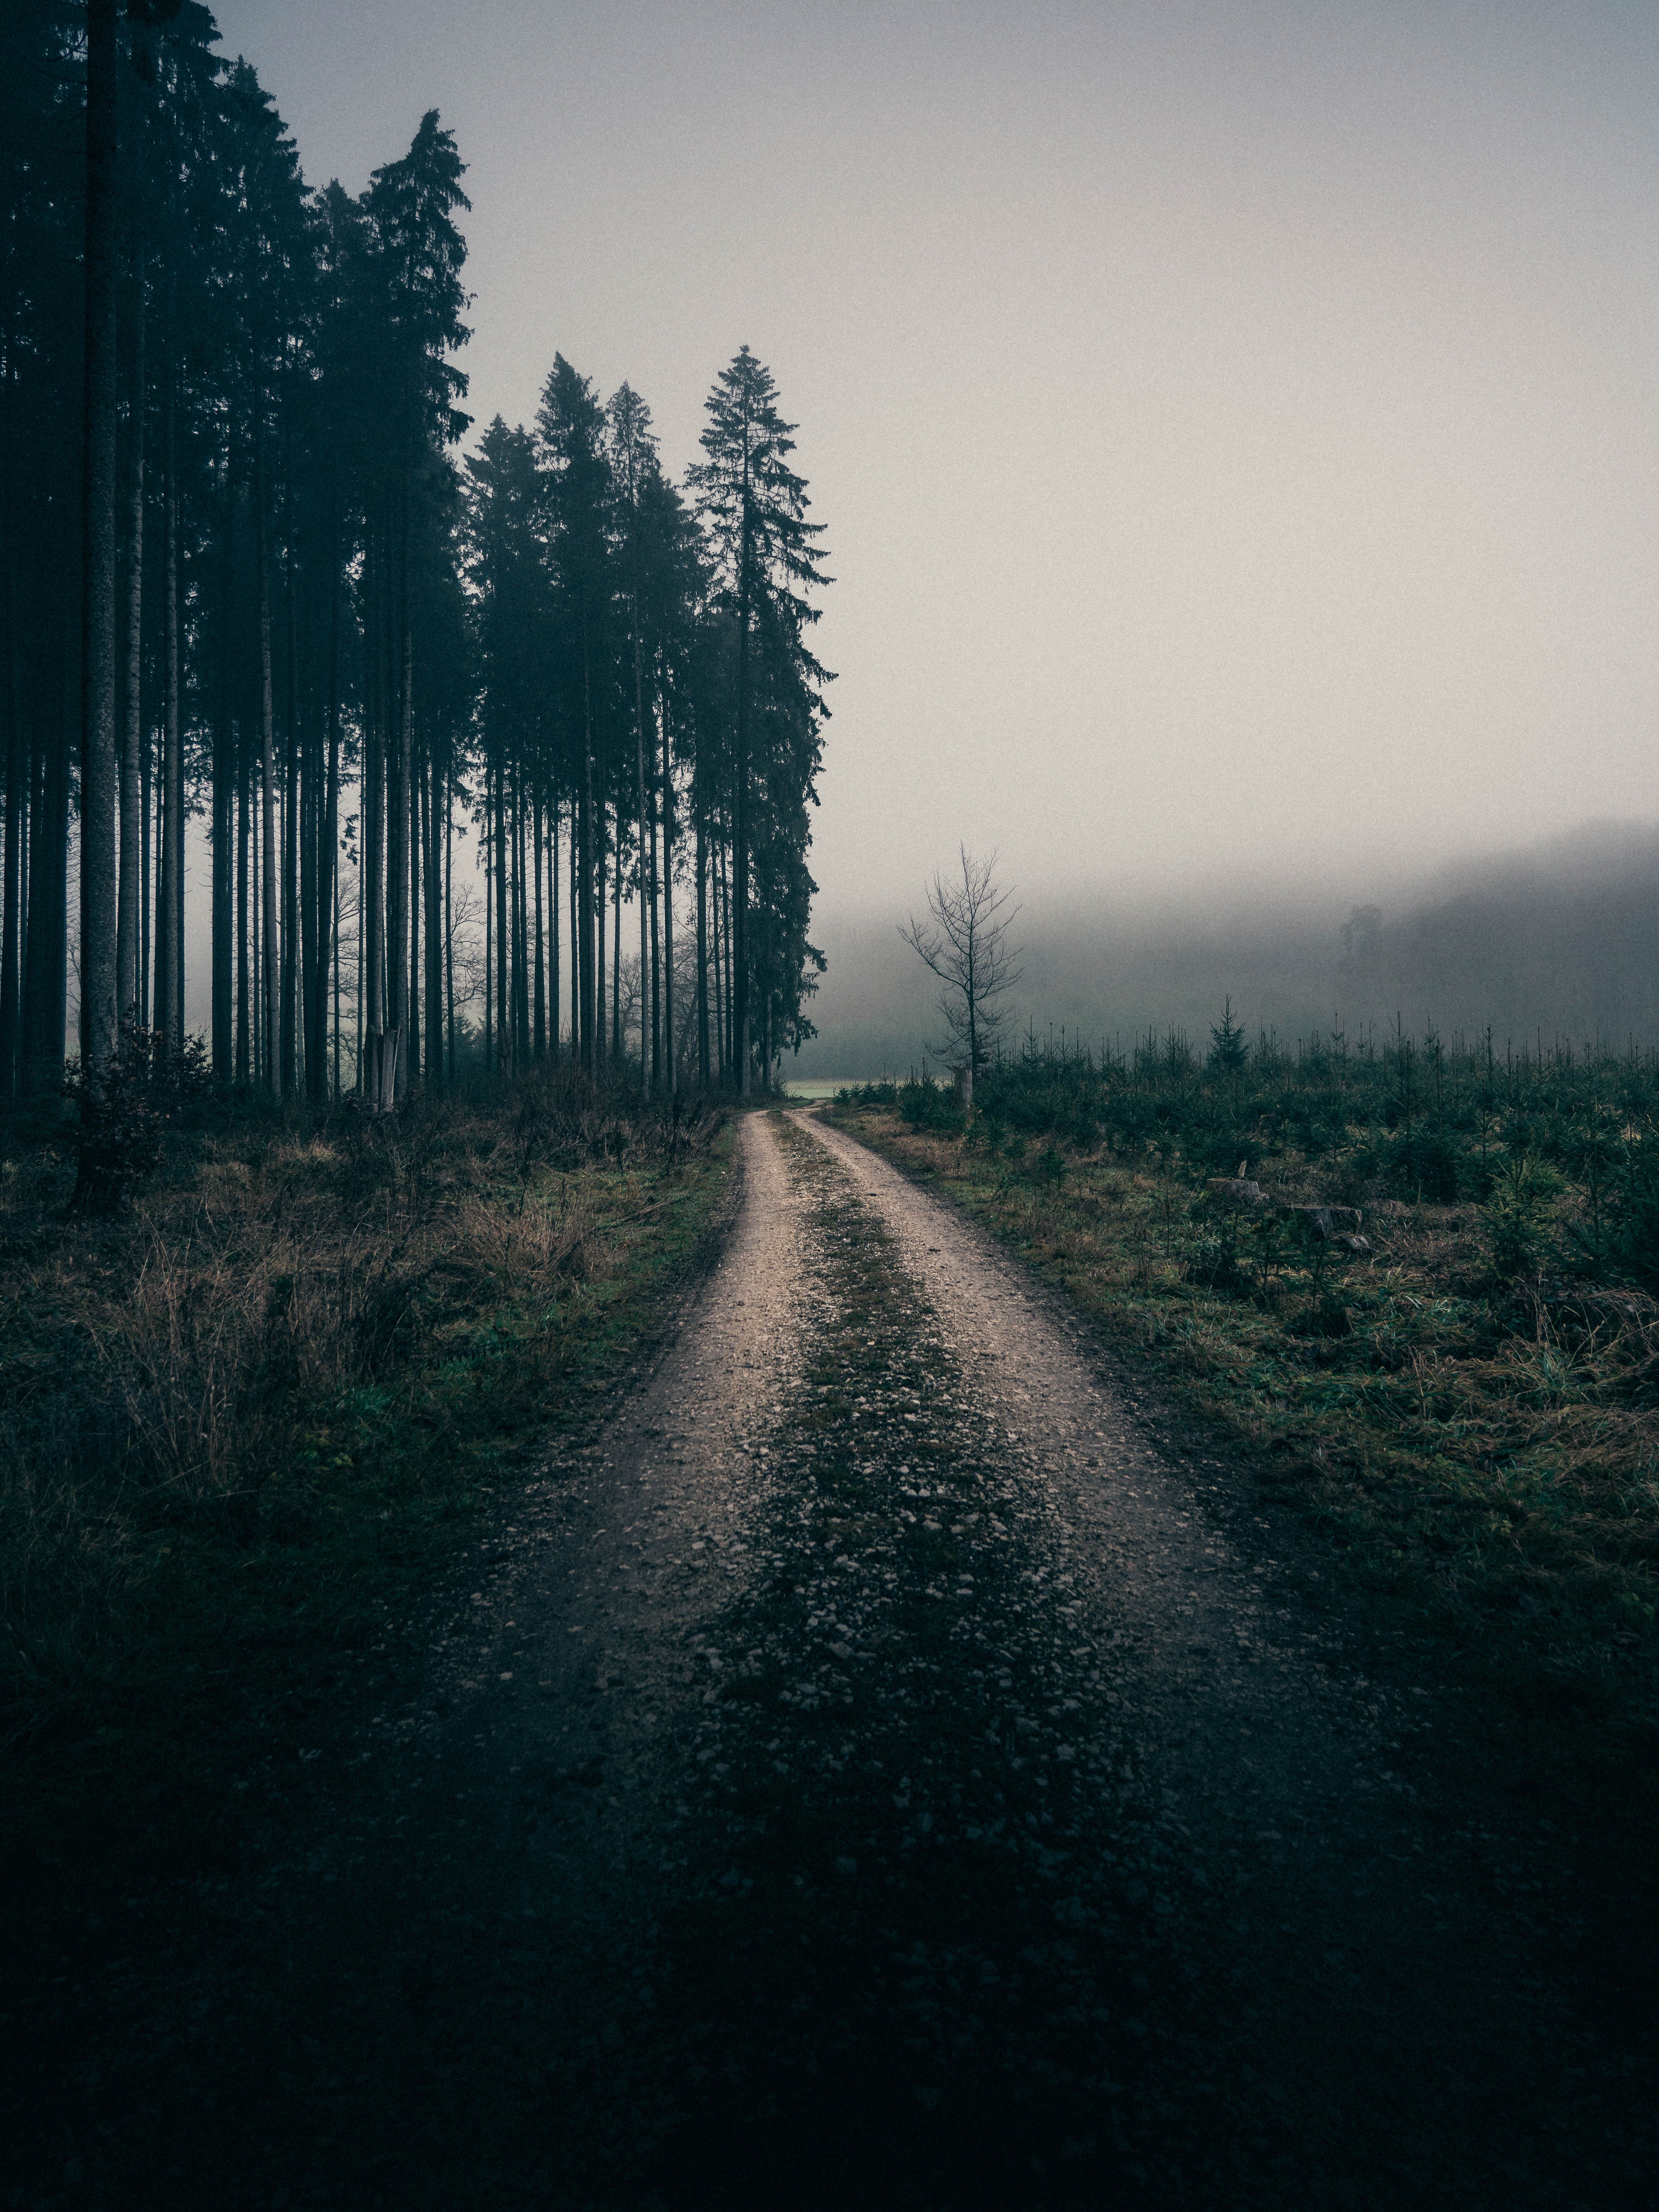 A foggy, dirt road surrounded by trees. - Foggy forest, fog